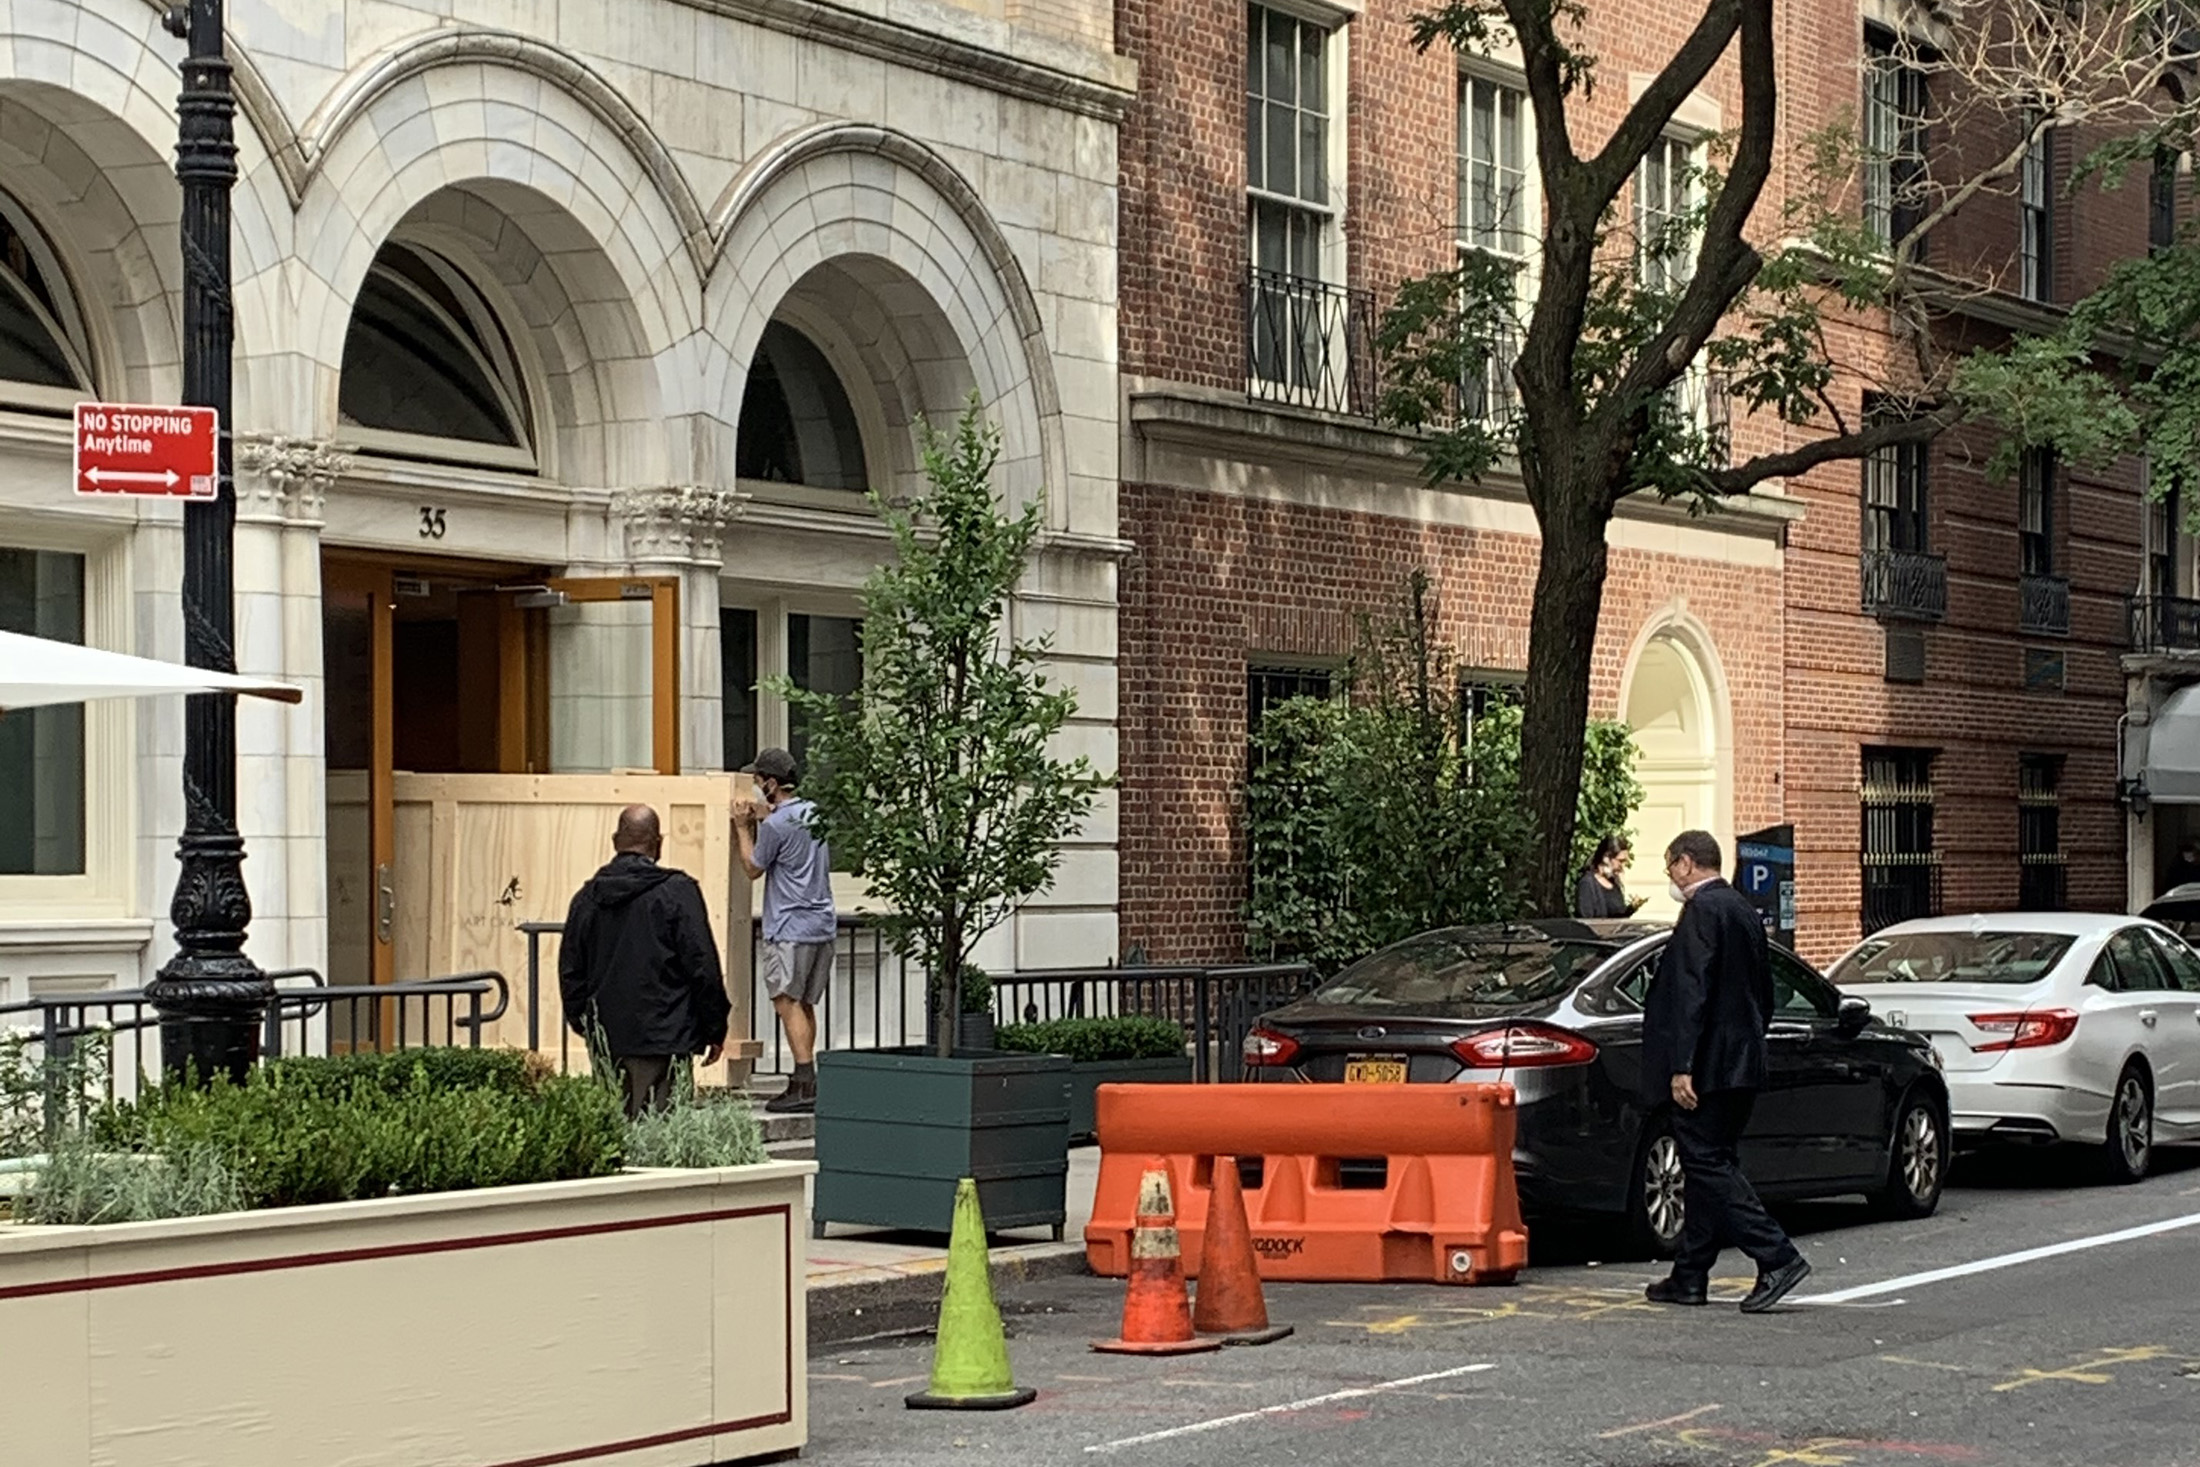 Workers remove crates of artwork from Ron Perelman's Upper East Side offices and into waiting trucks.